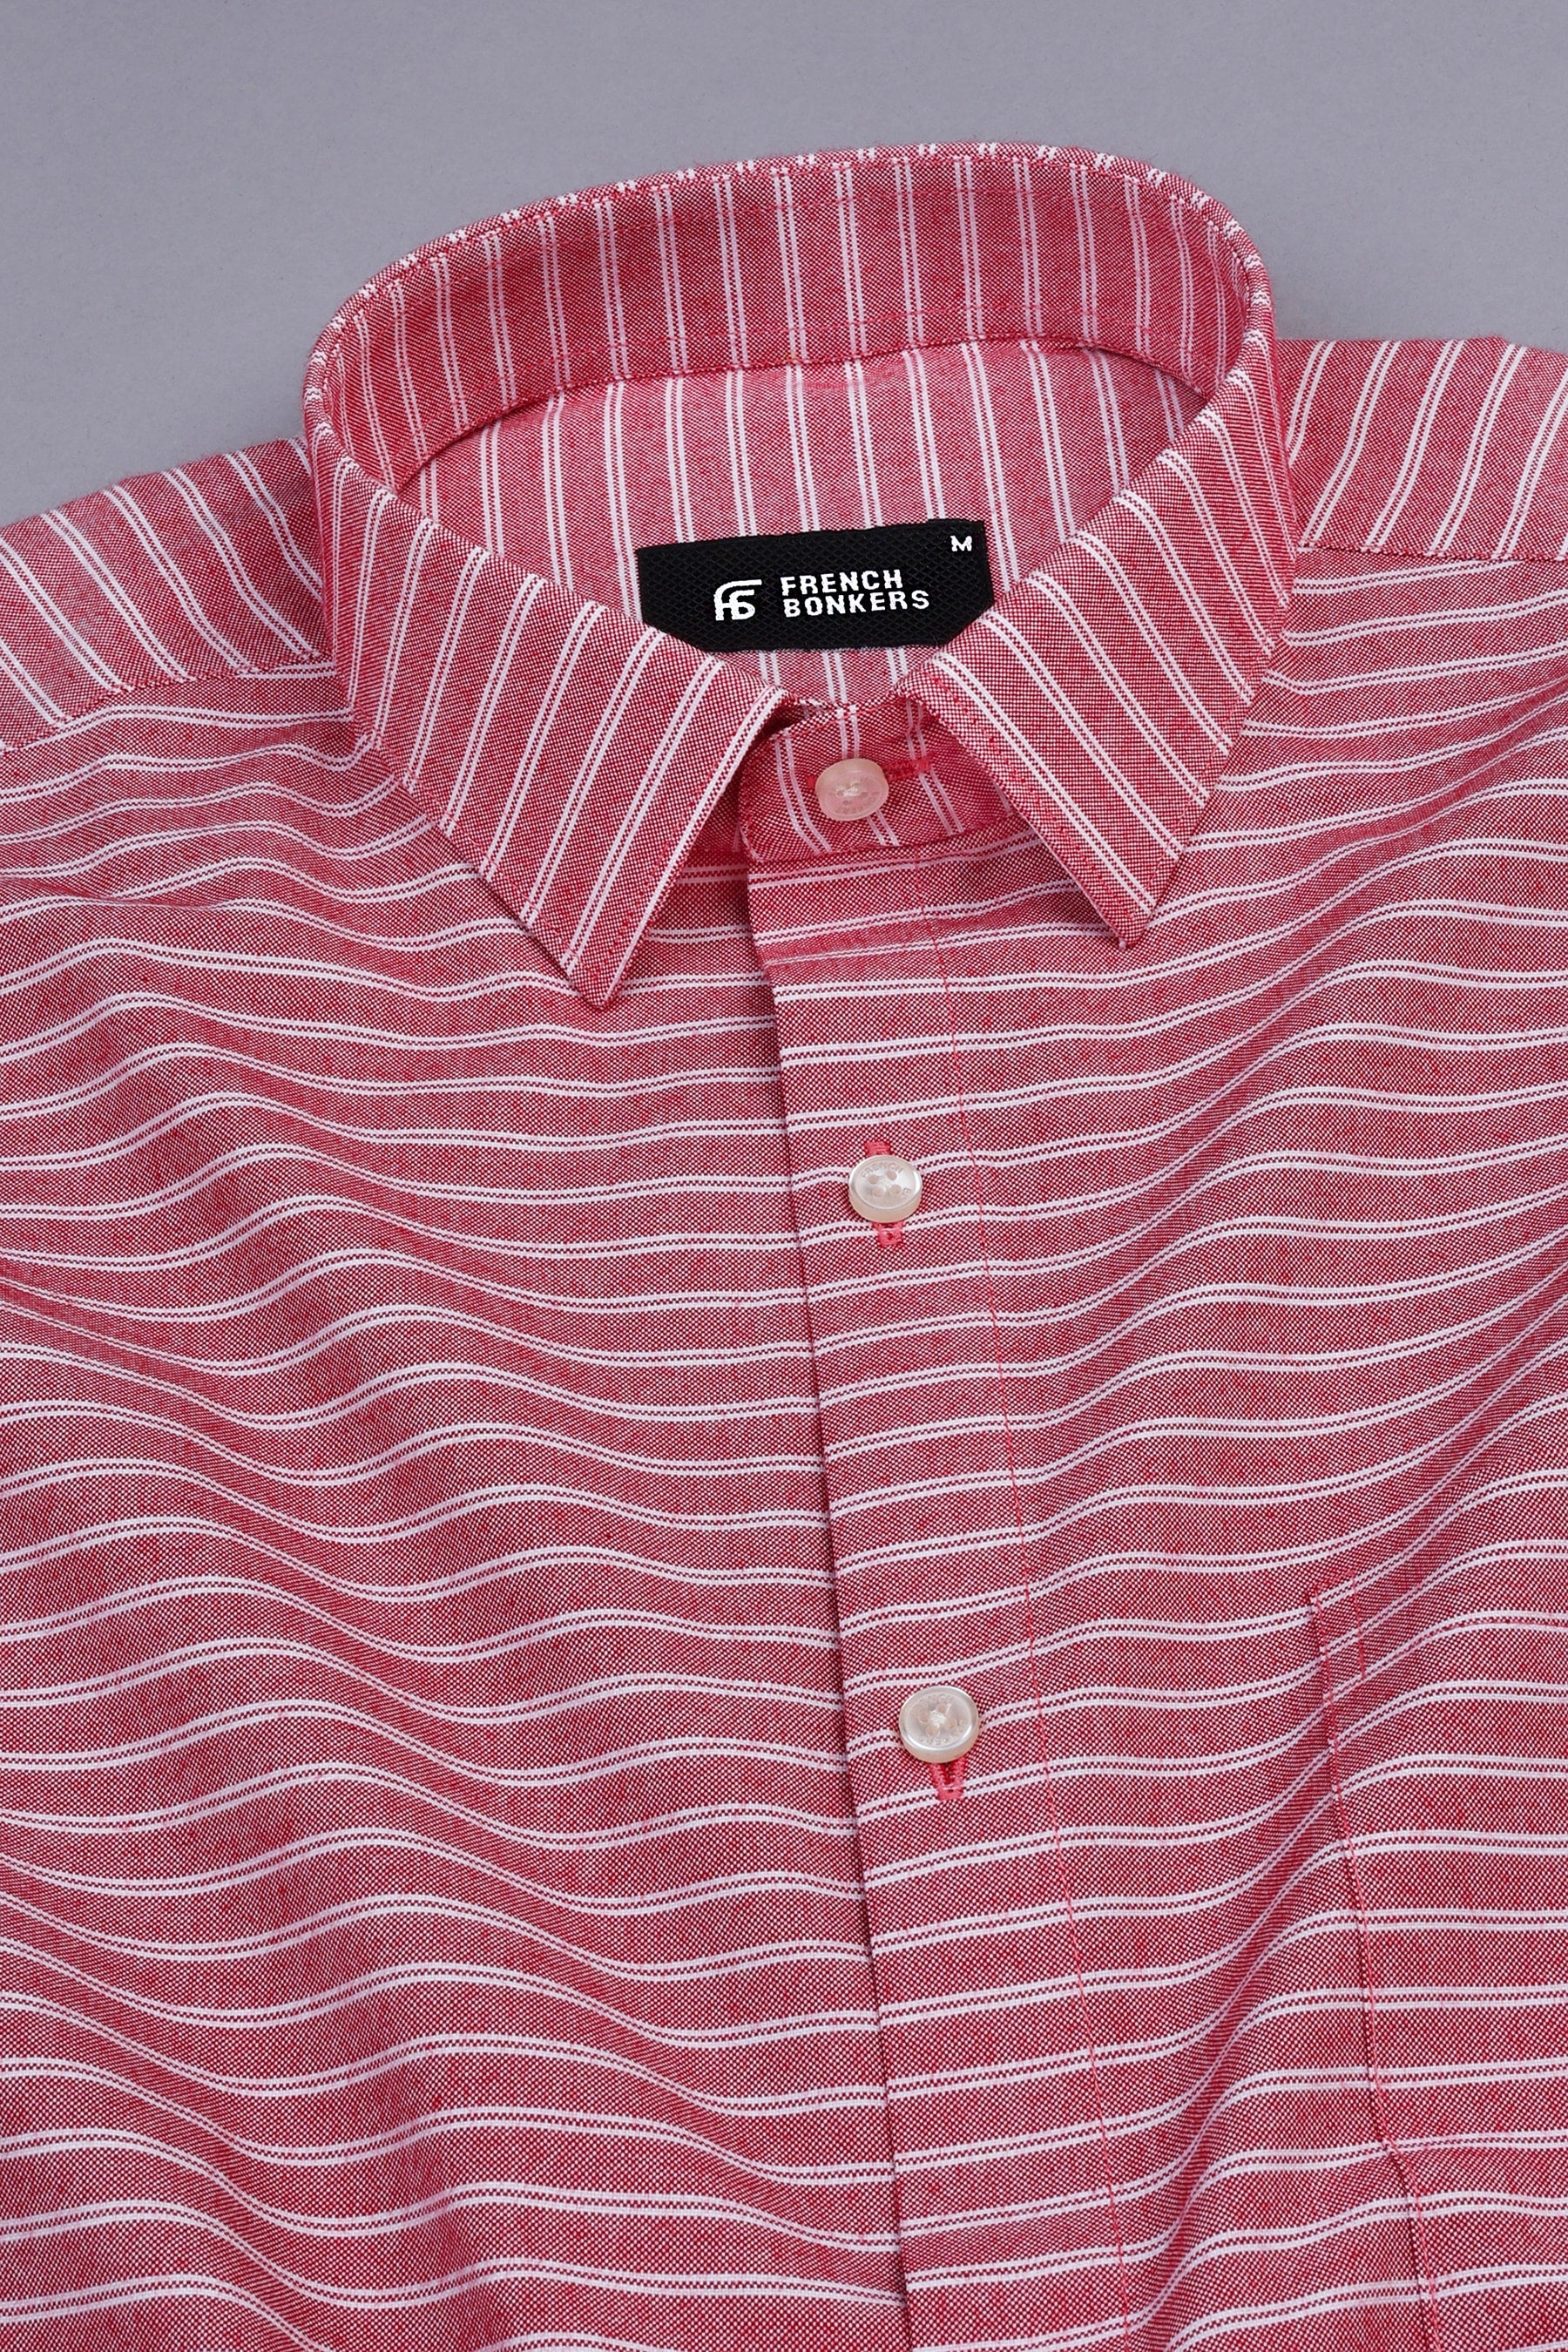 Cardinal red with white double line regency stripe shirt